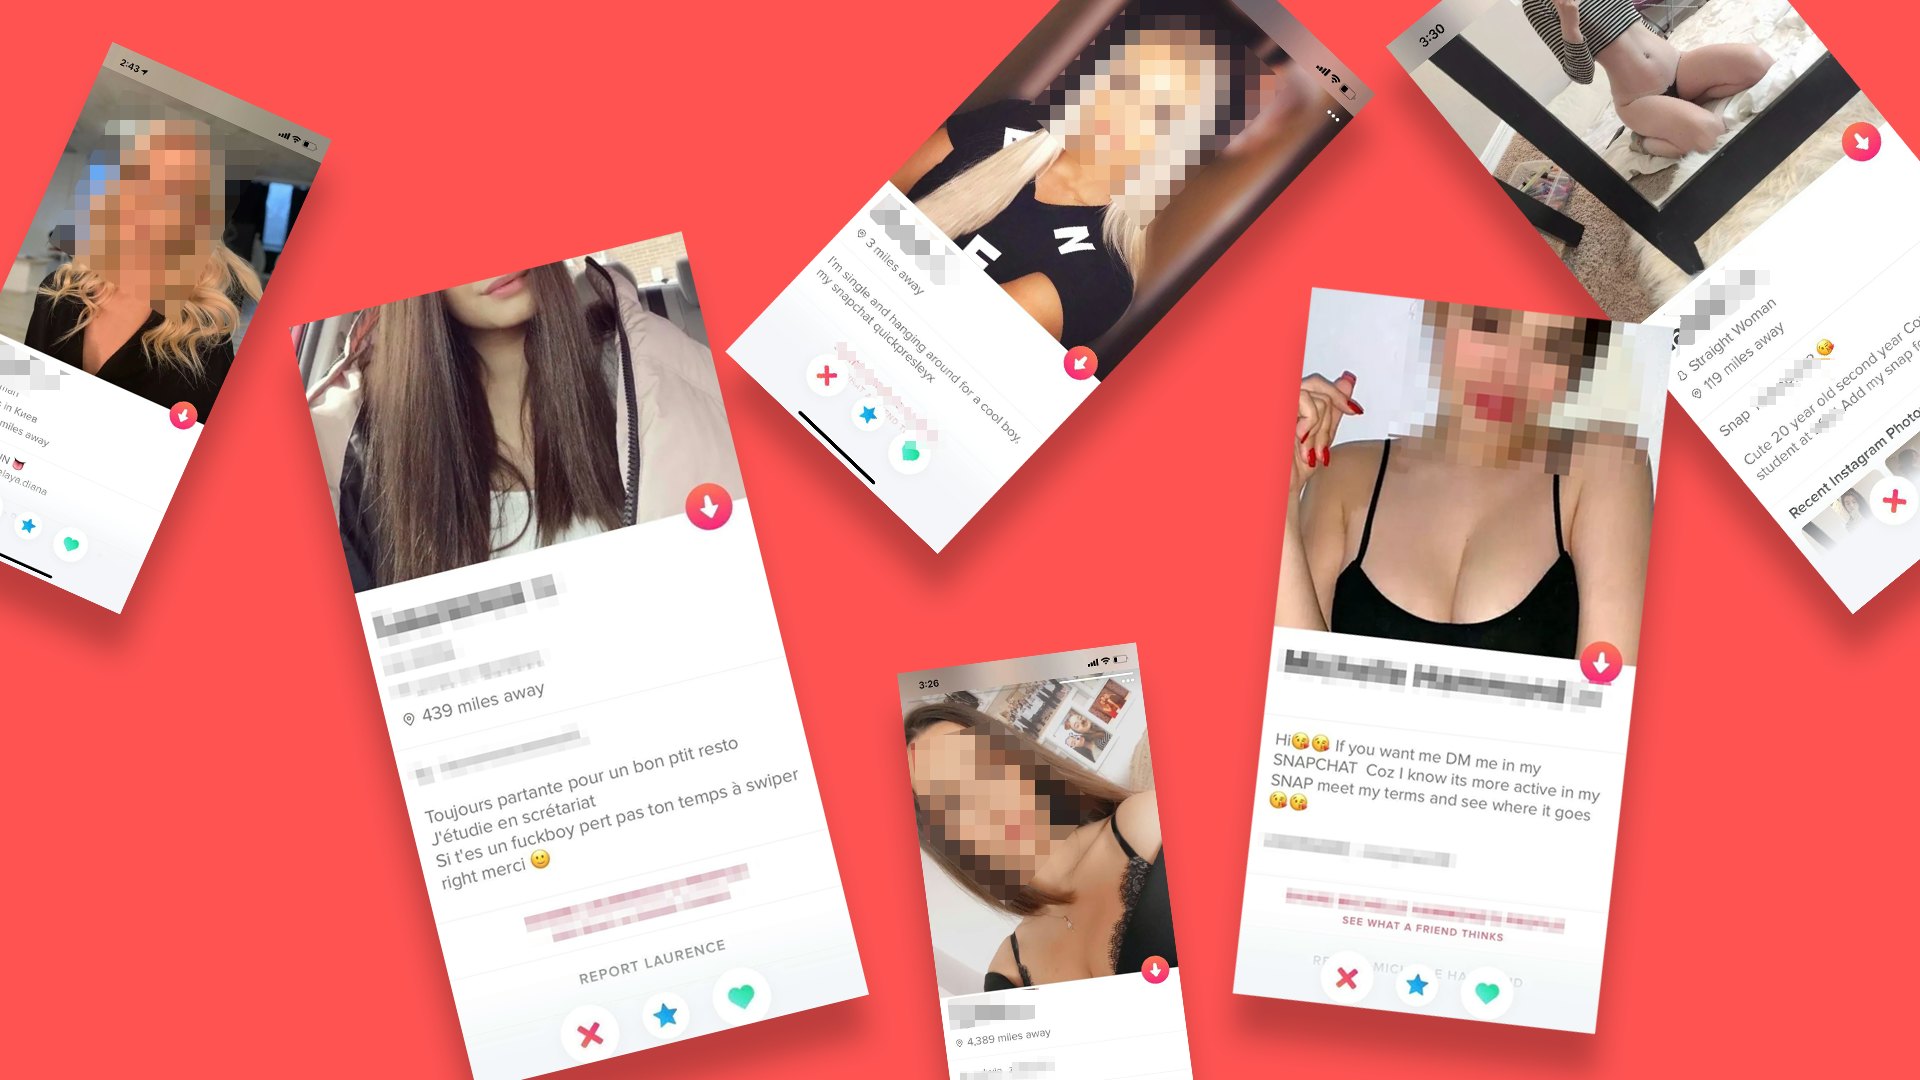 Men on Tinder Explain Why They Swipe Right on Literally Everyone